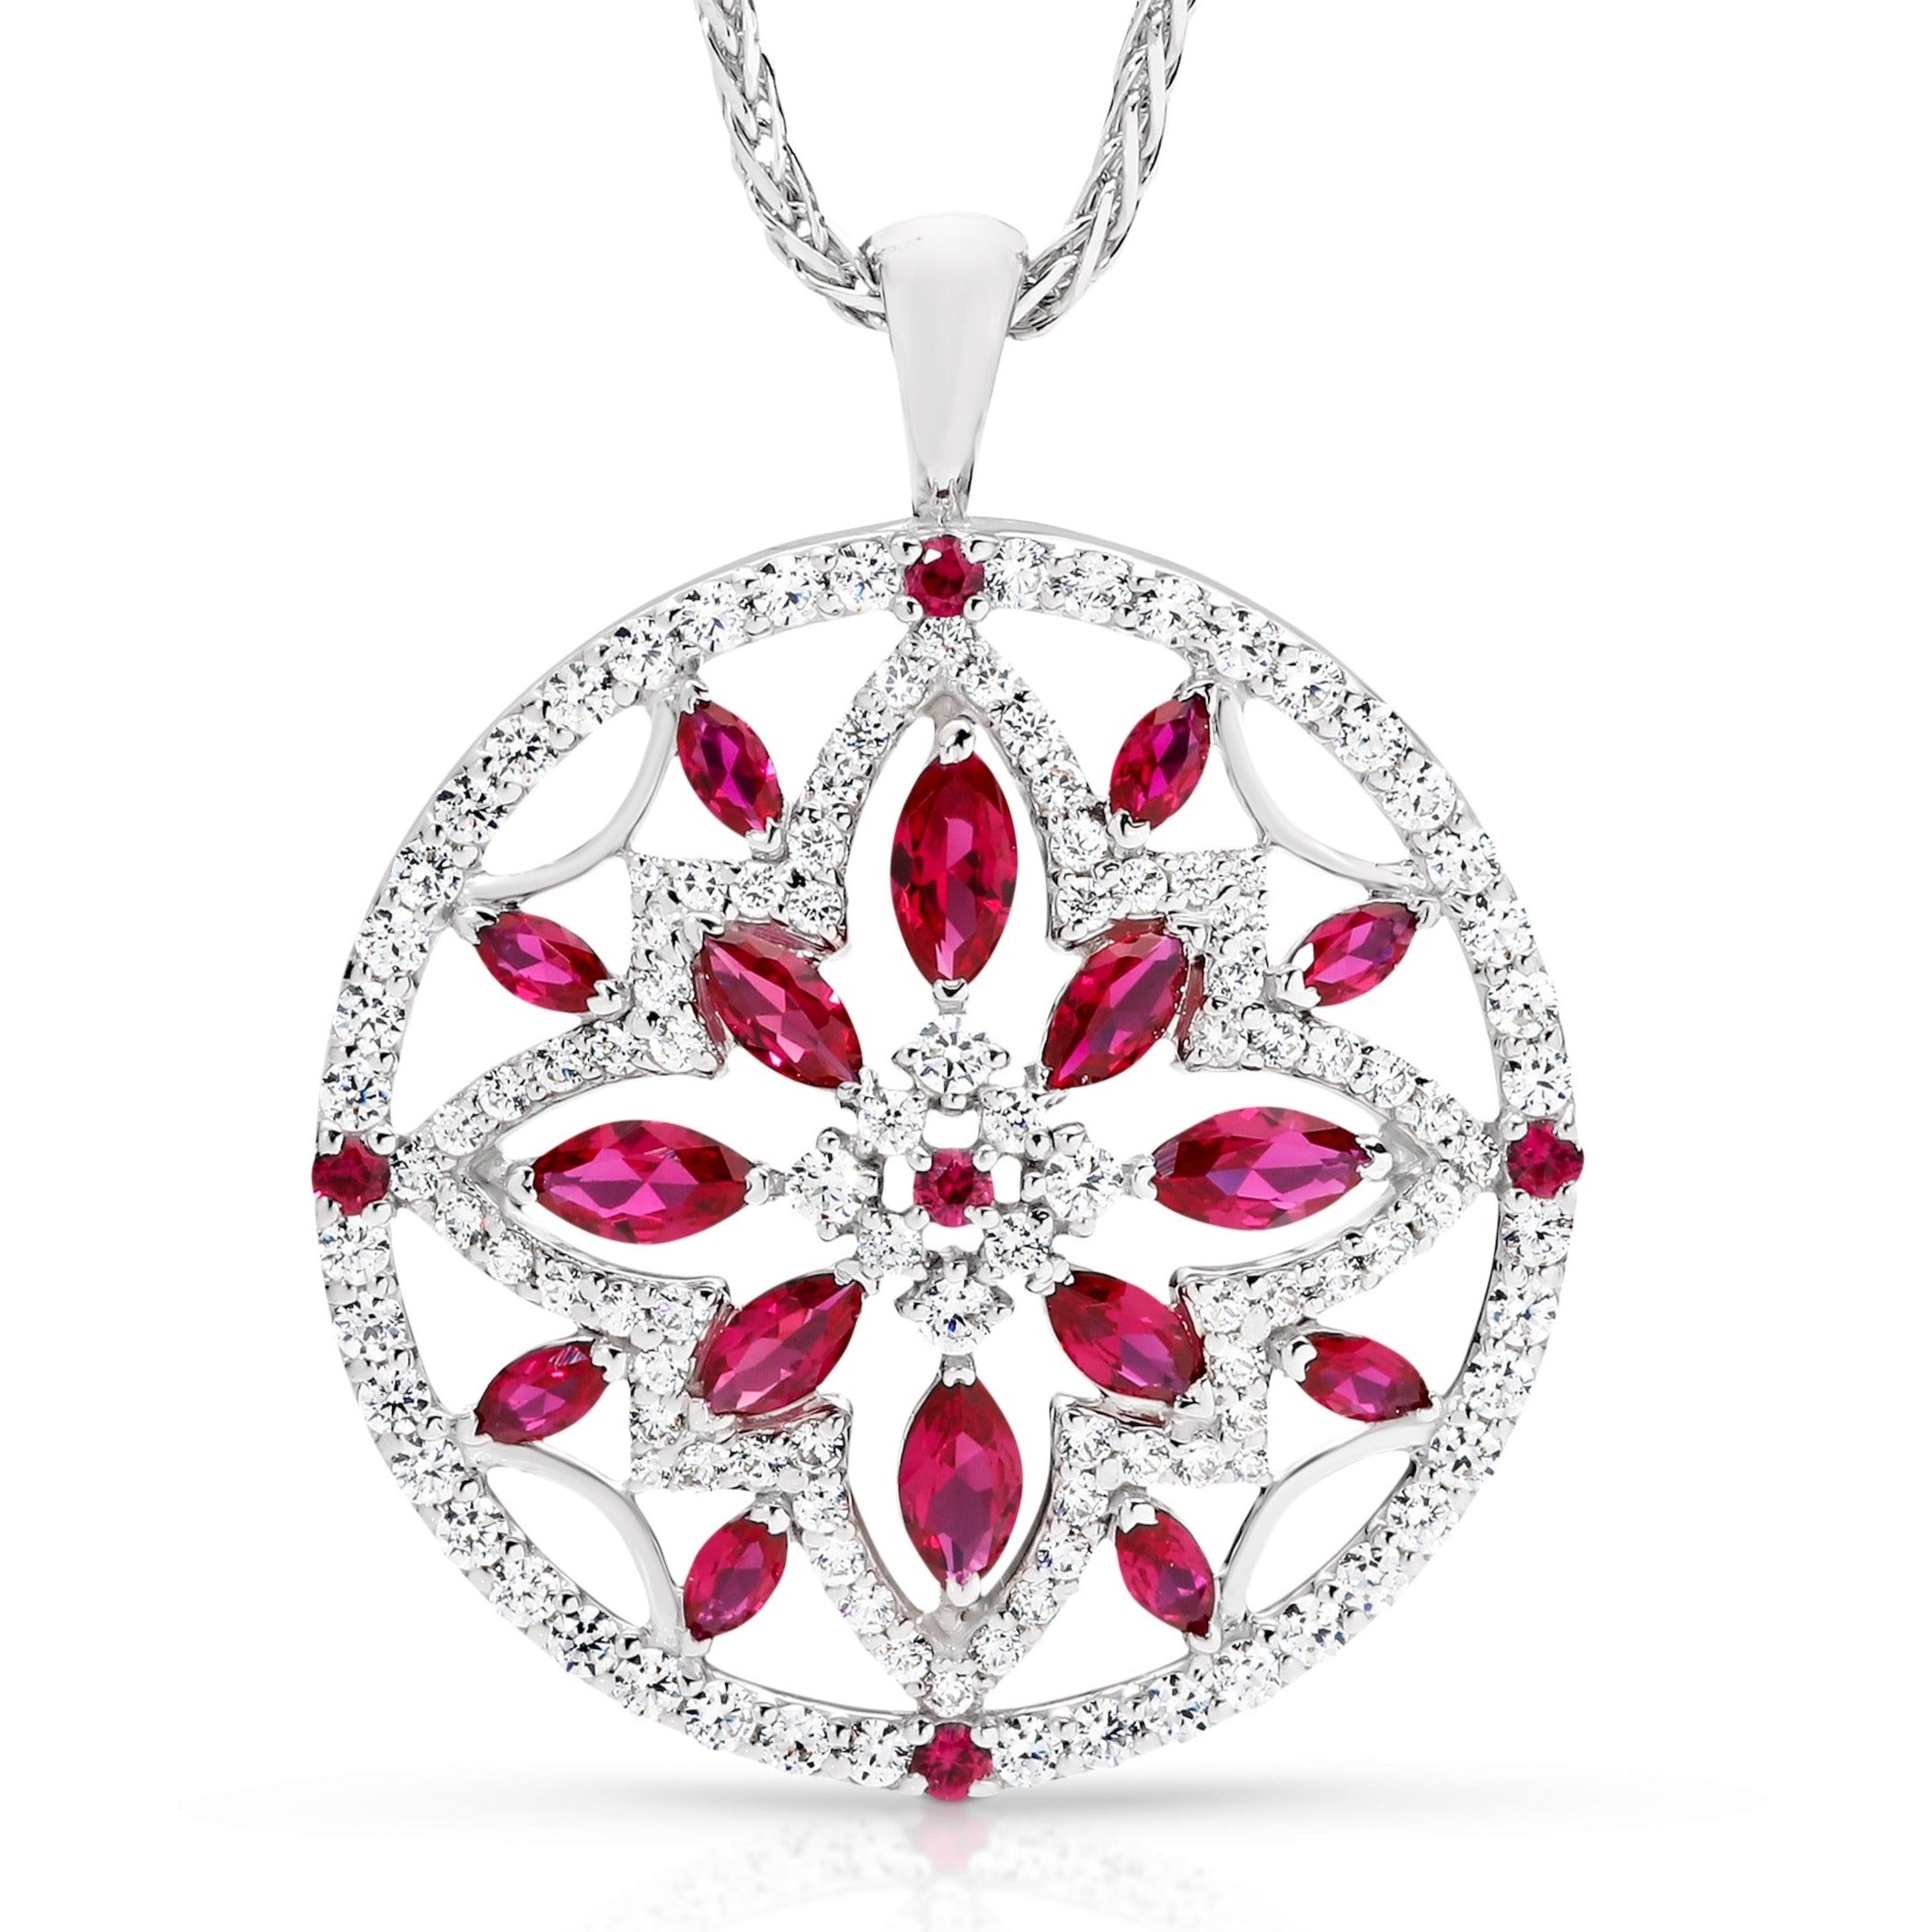 The "Scarlett" Limited Edition Pendant